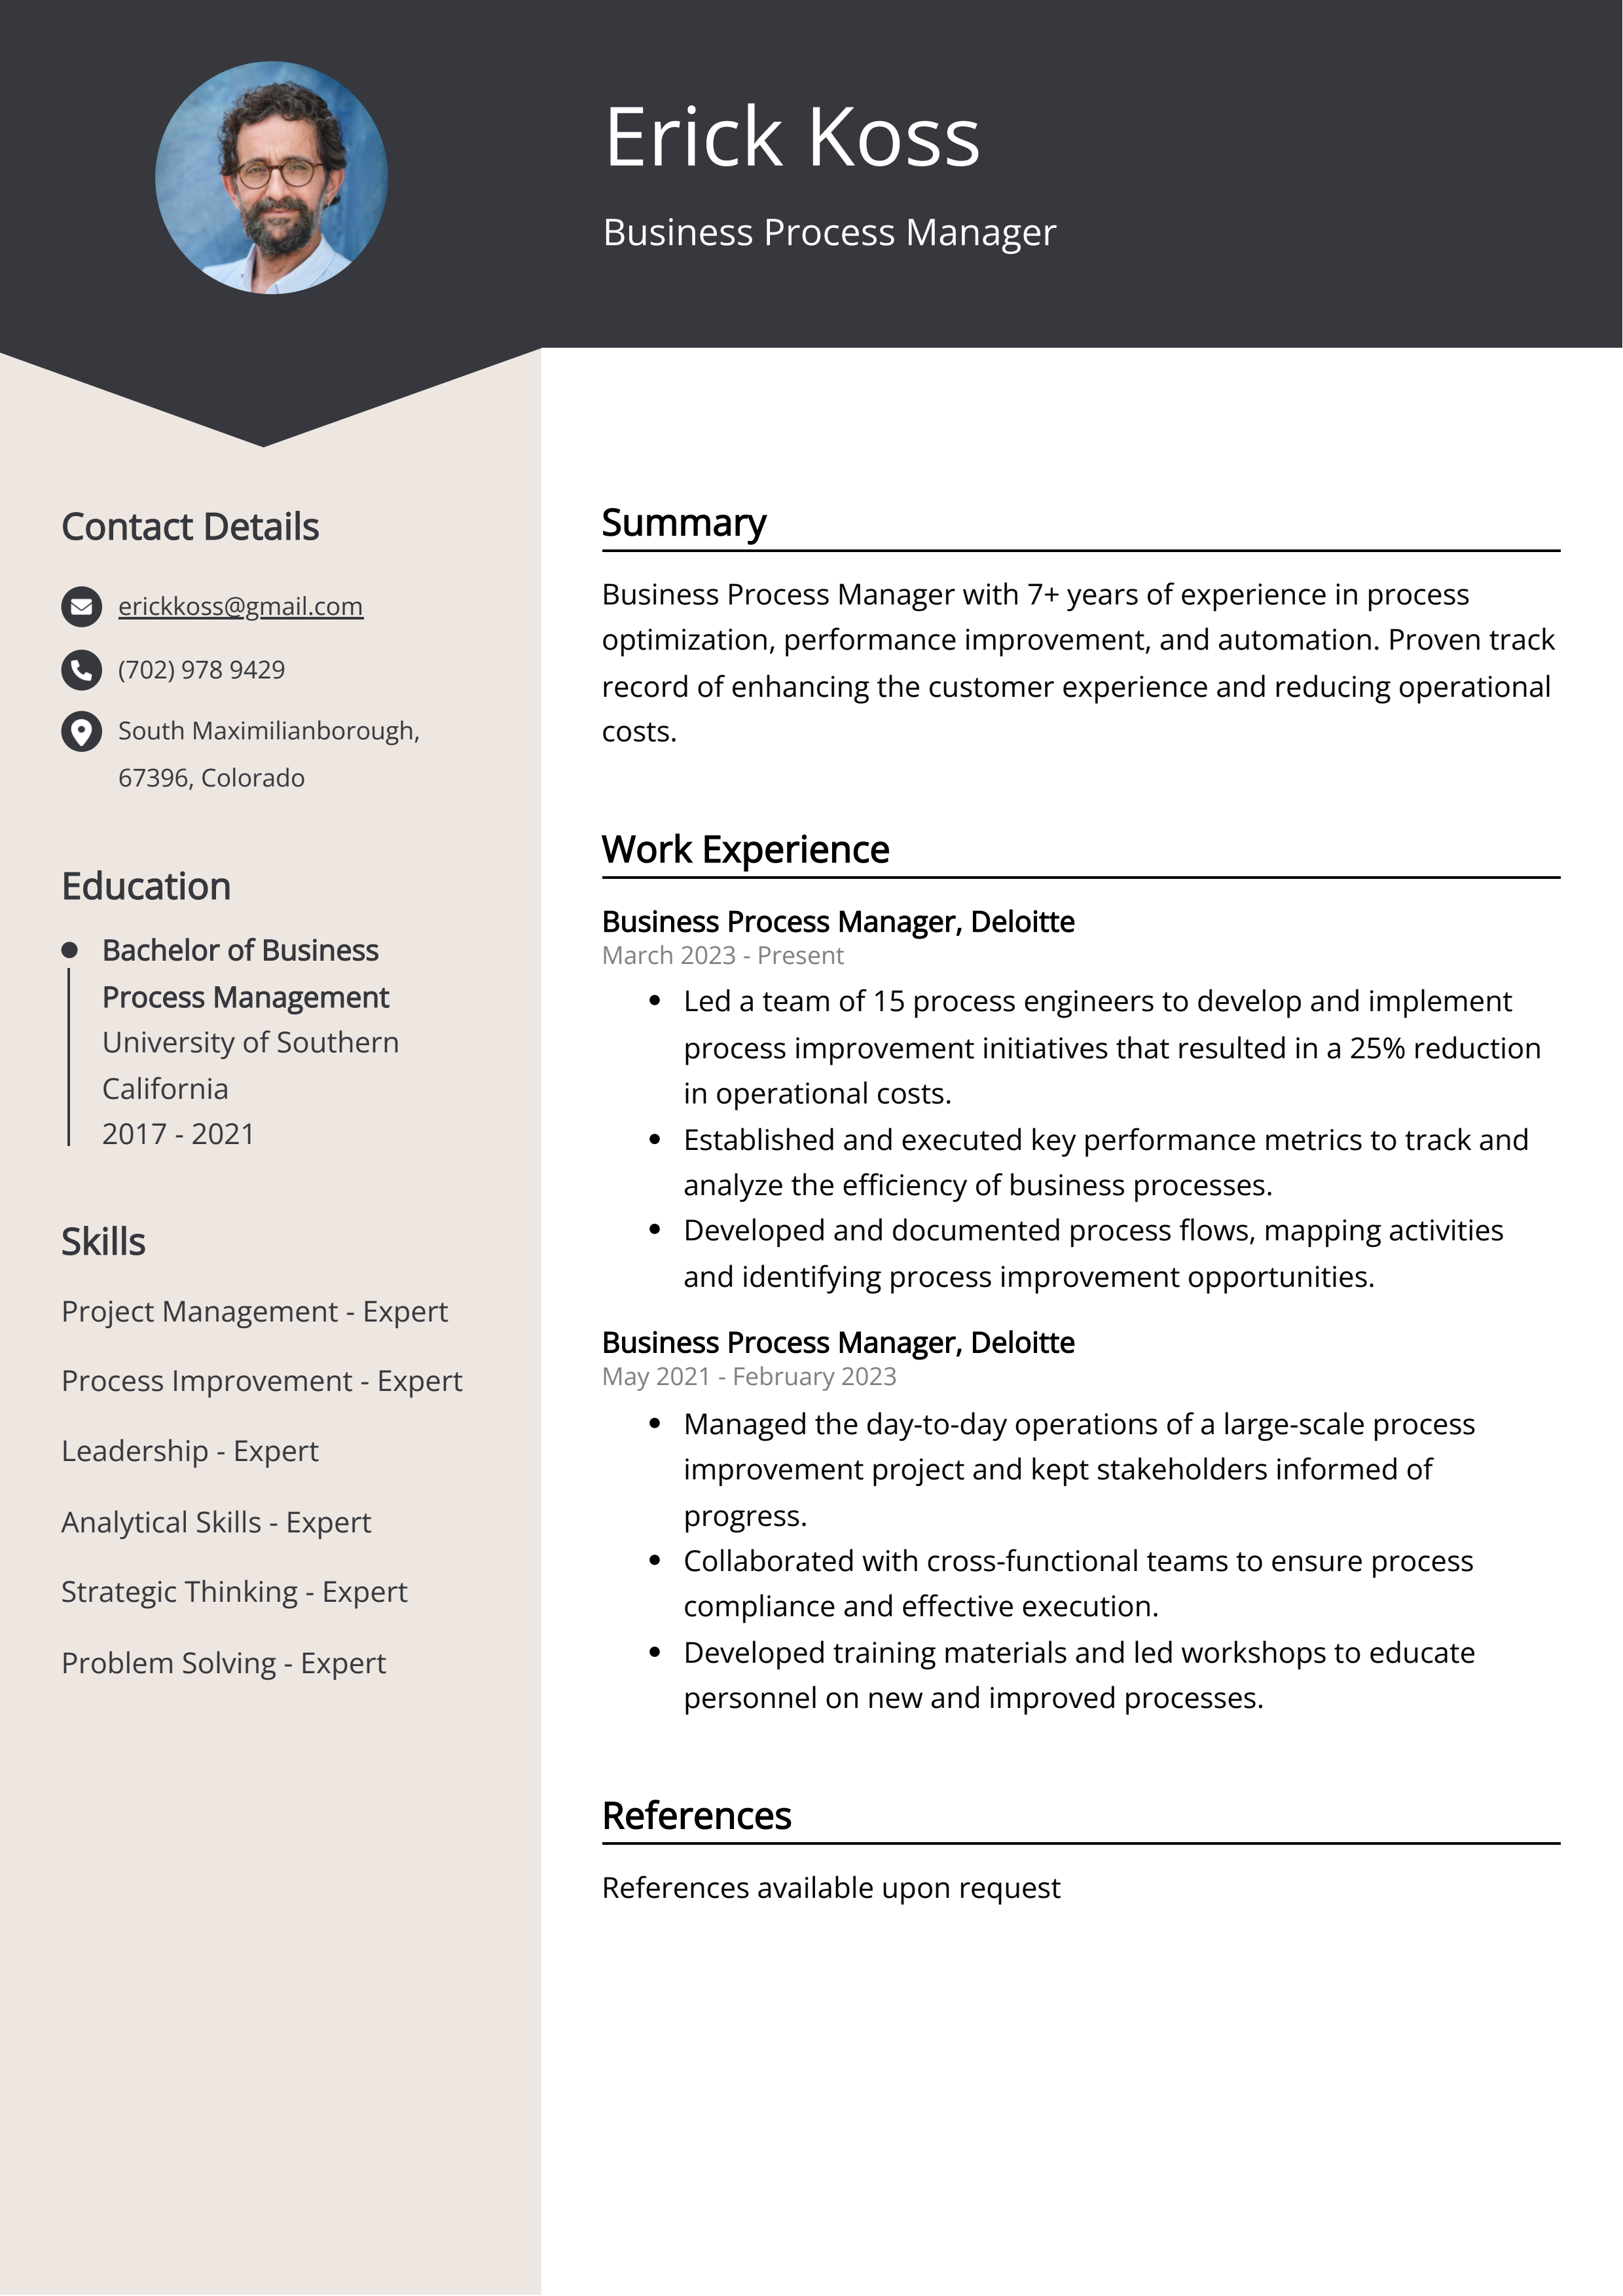 Business Process Manager CV Example